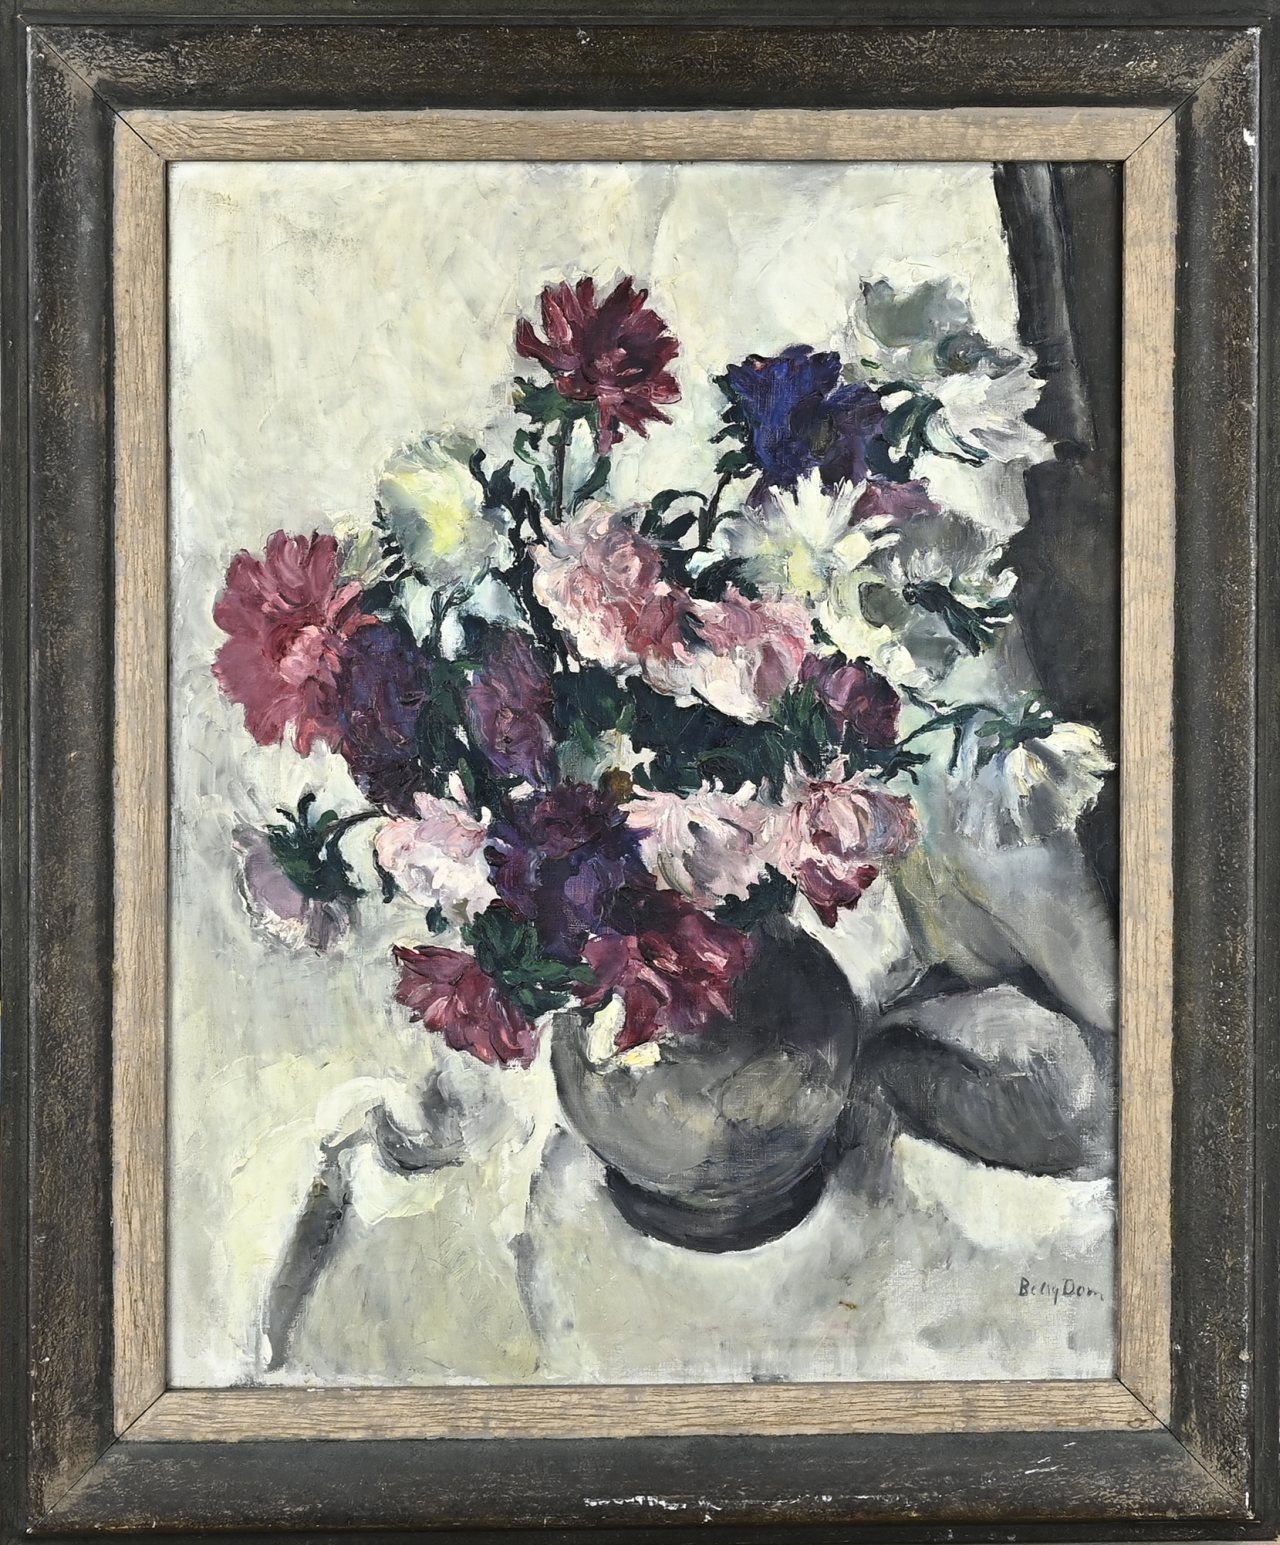 Betsy Dom, Vase of Flowers